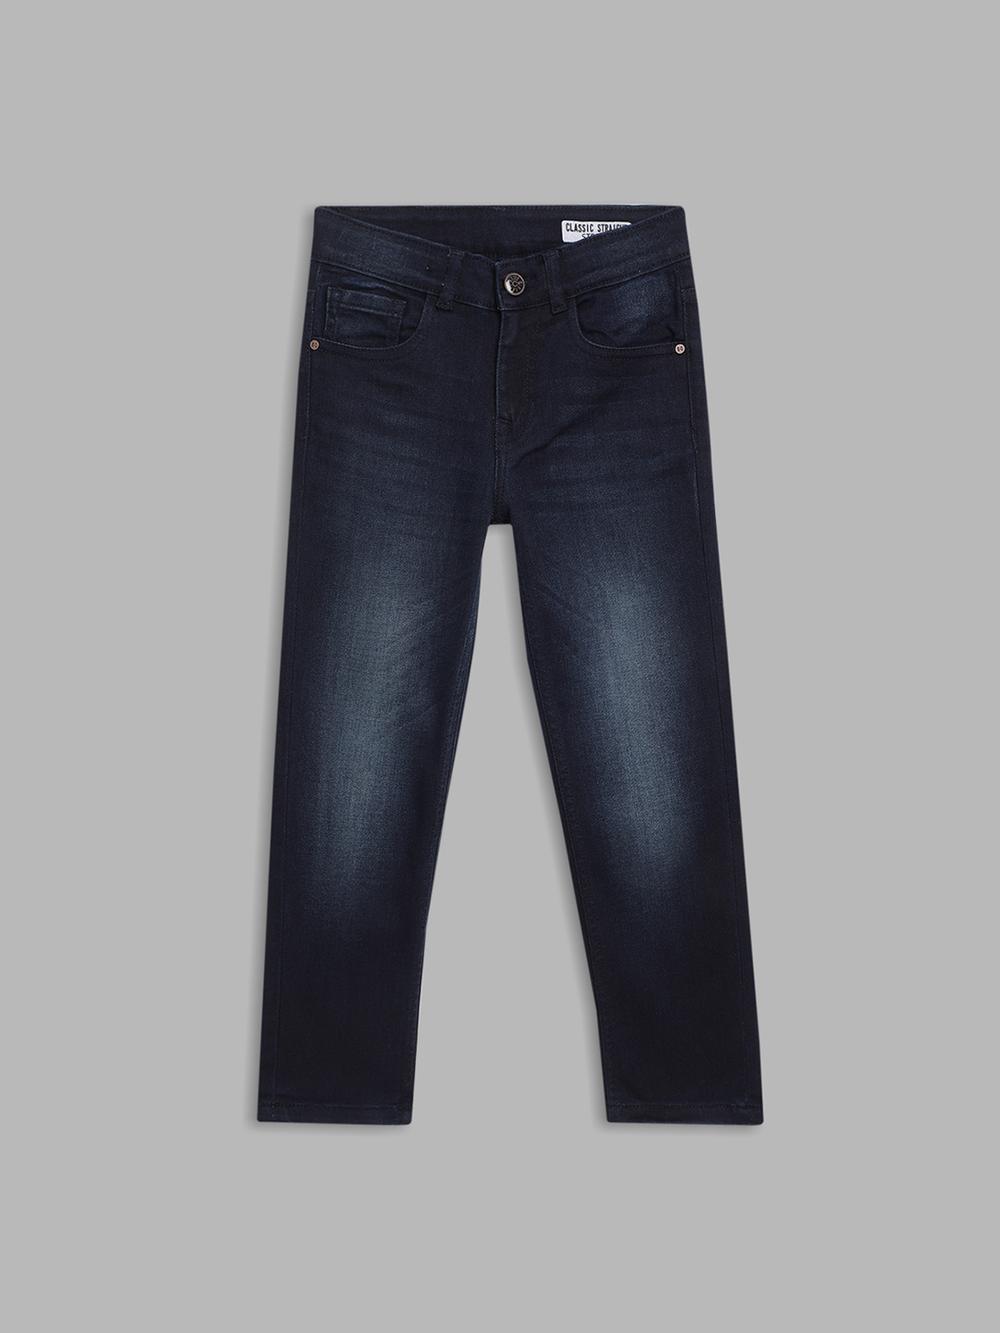 navy-blue-solid-straight-fit-jeans